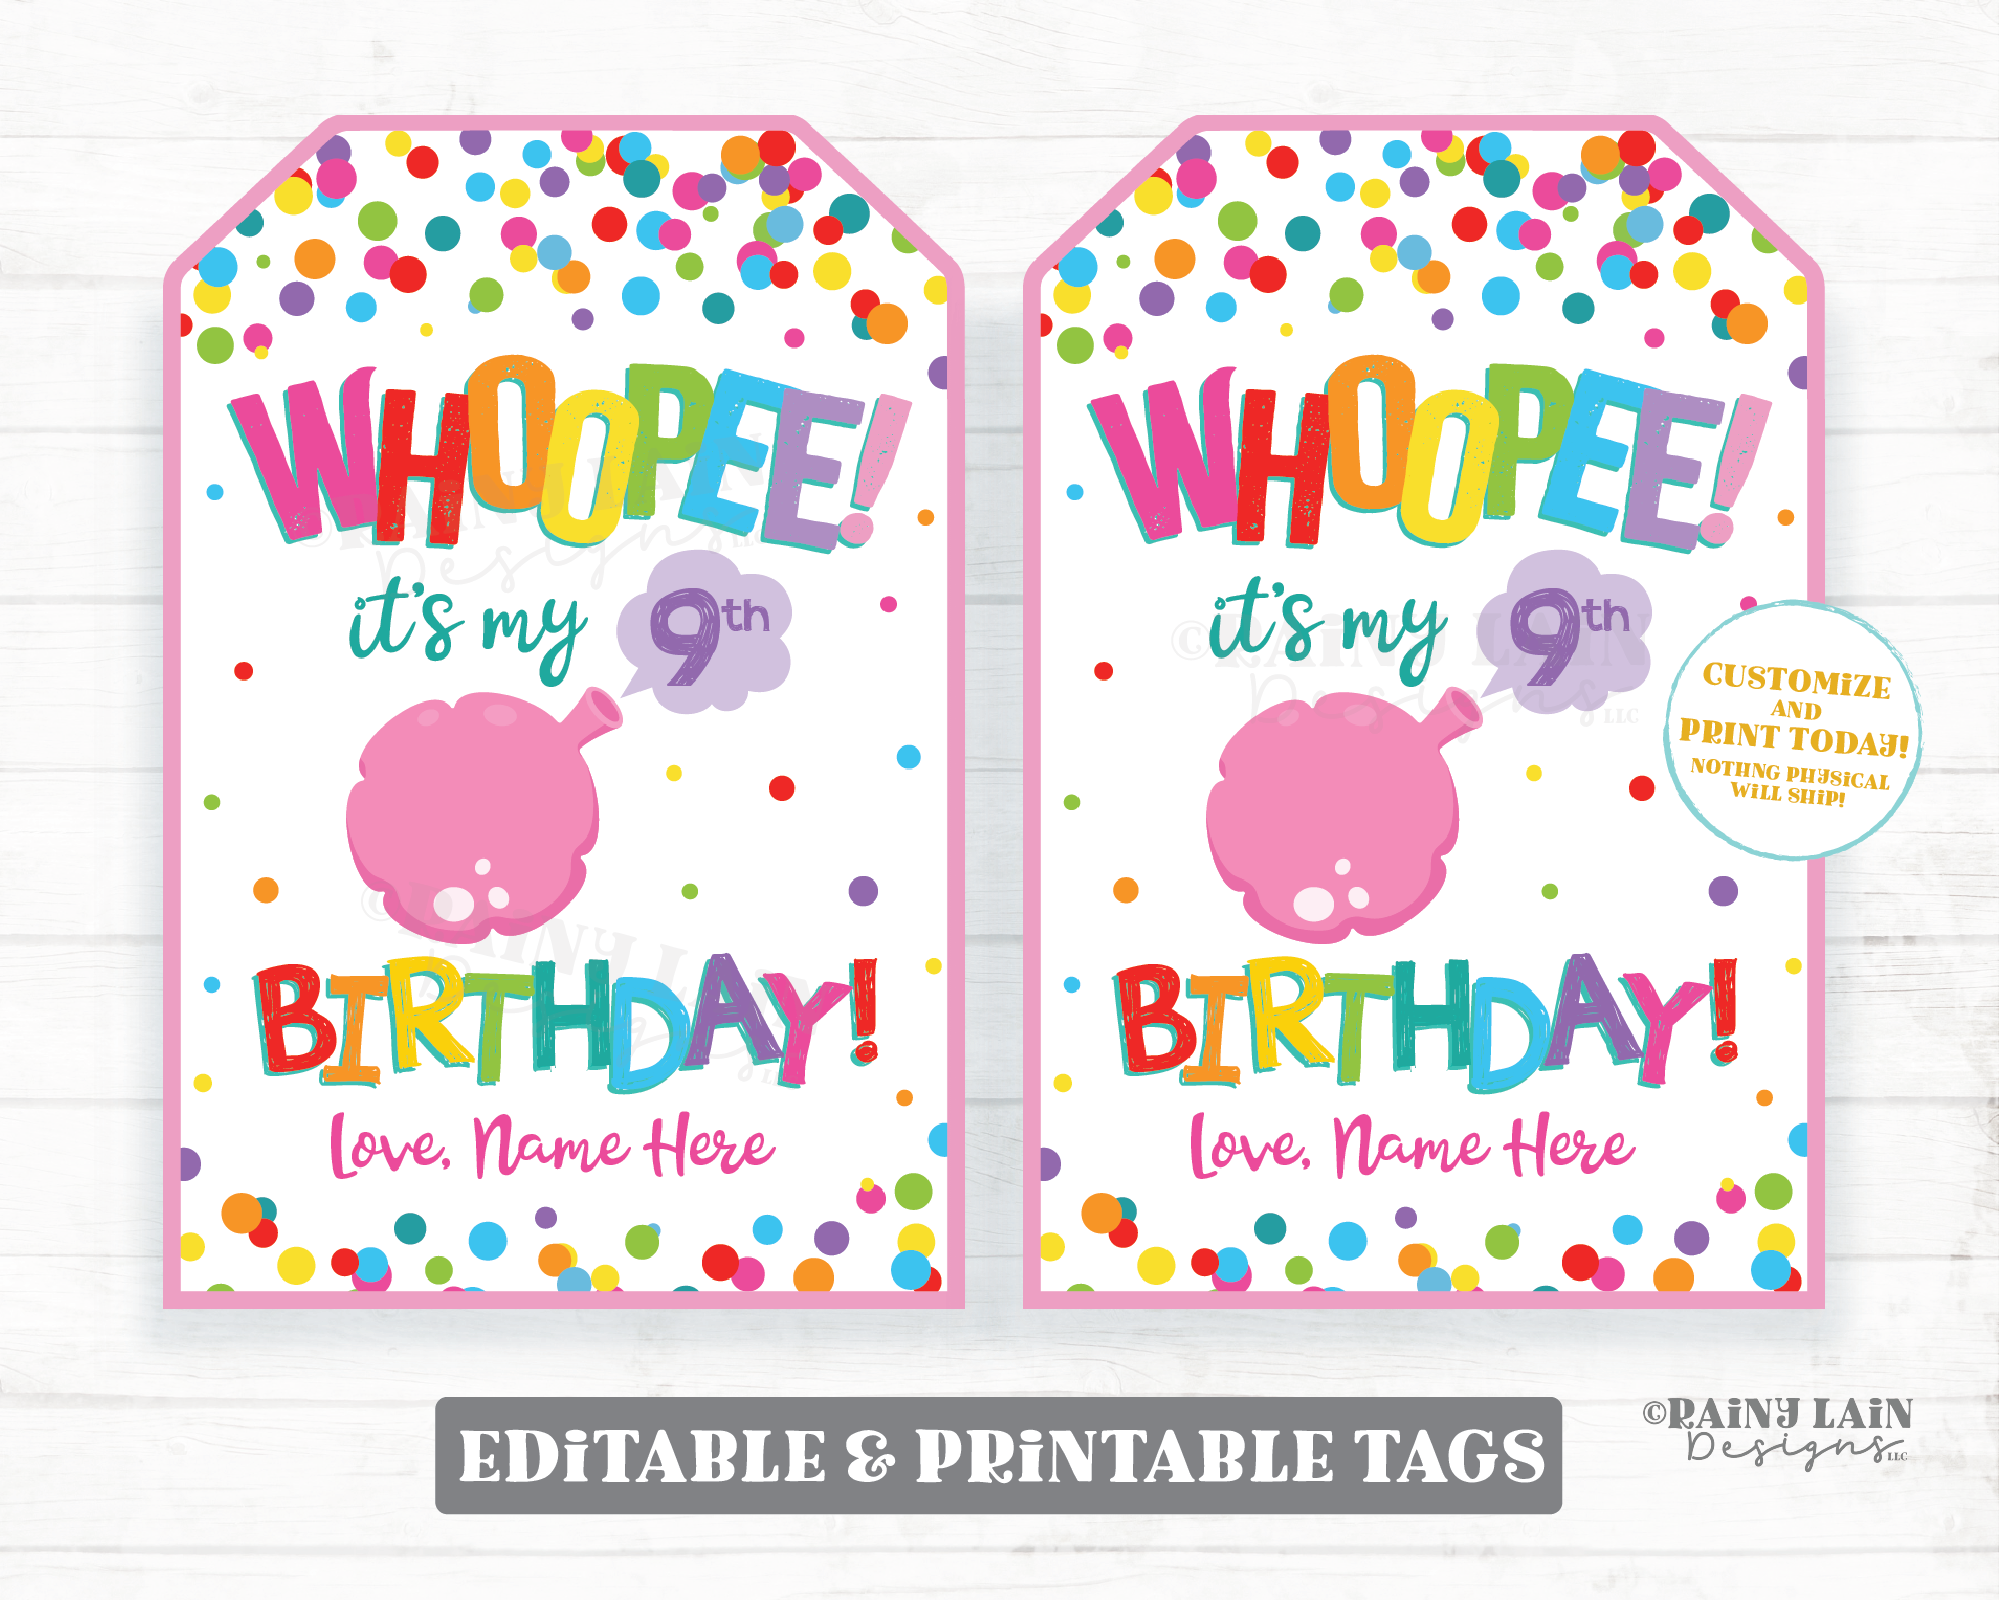 Whoopee It's My Birthday Party Favor Tags Preschool Student Classroom Your Birthday Cushion Gift Tag Editable Printable